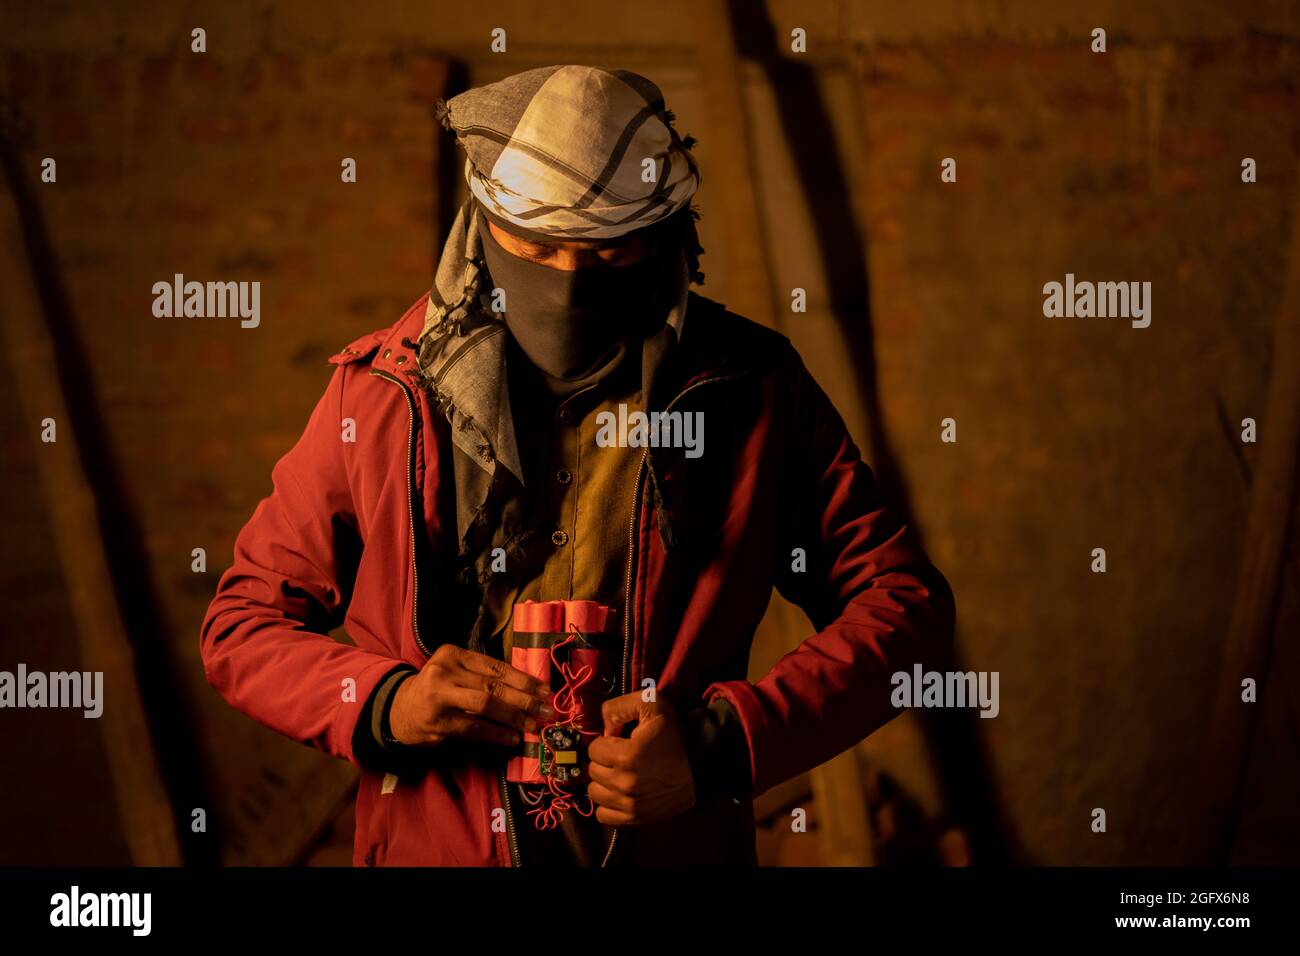 concept of suicide bomber attack, Militant with face cover placing Dynamite inside the jacket Stock Photo